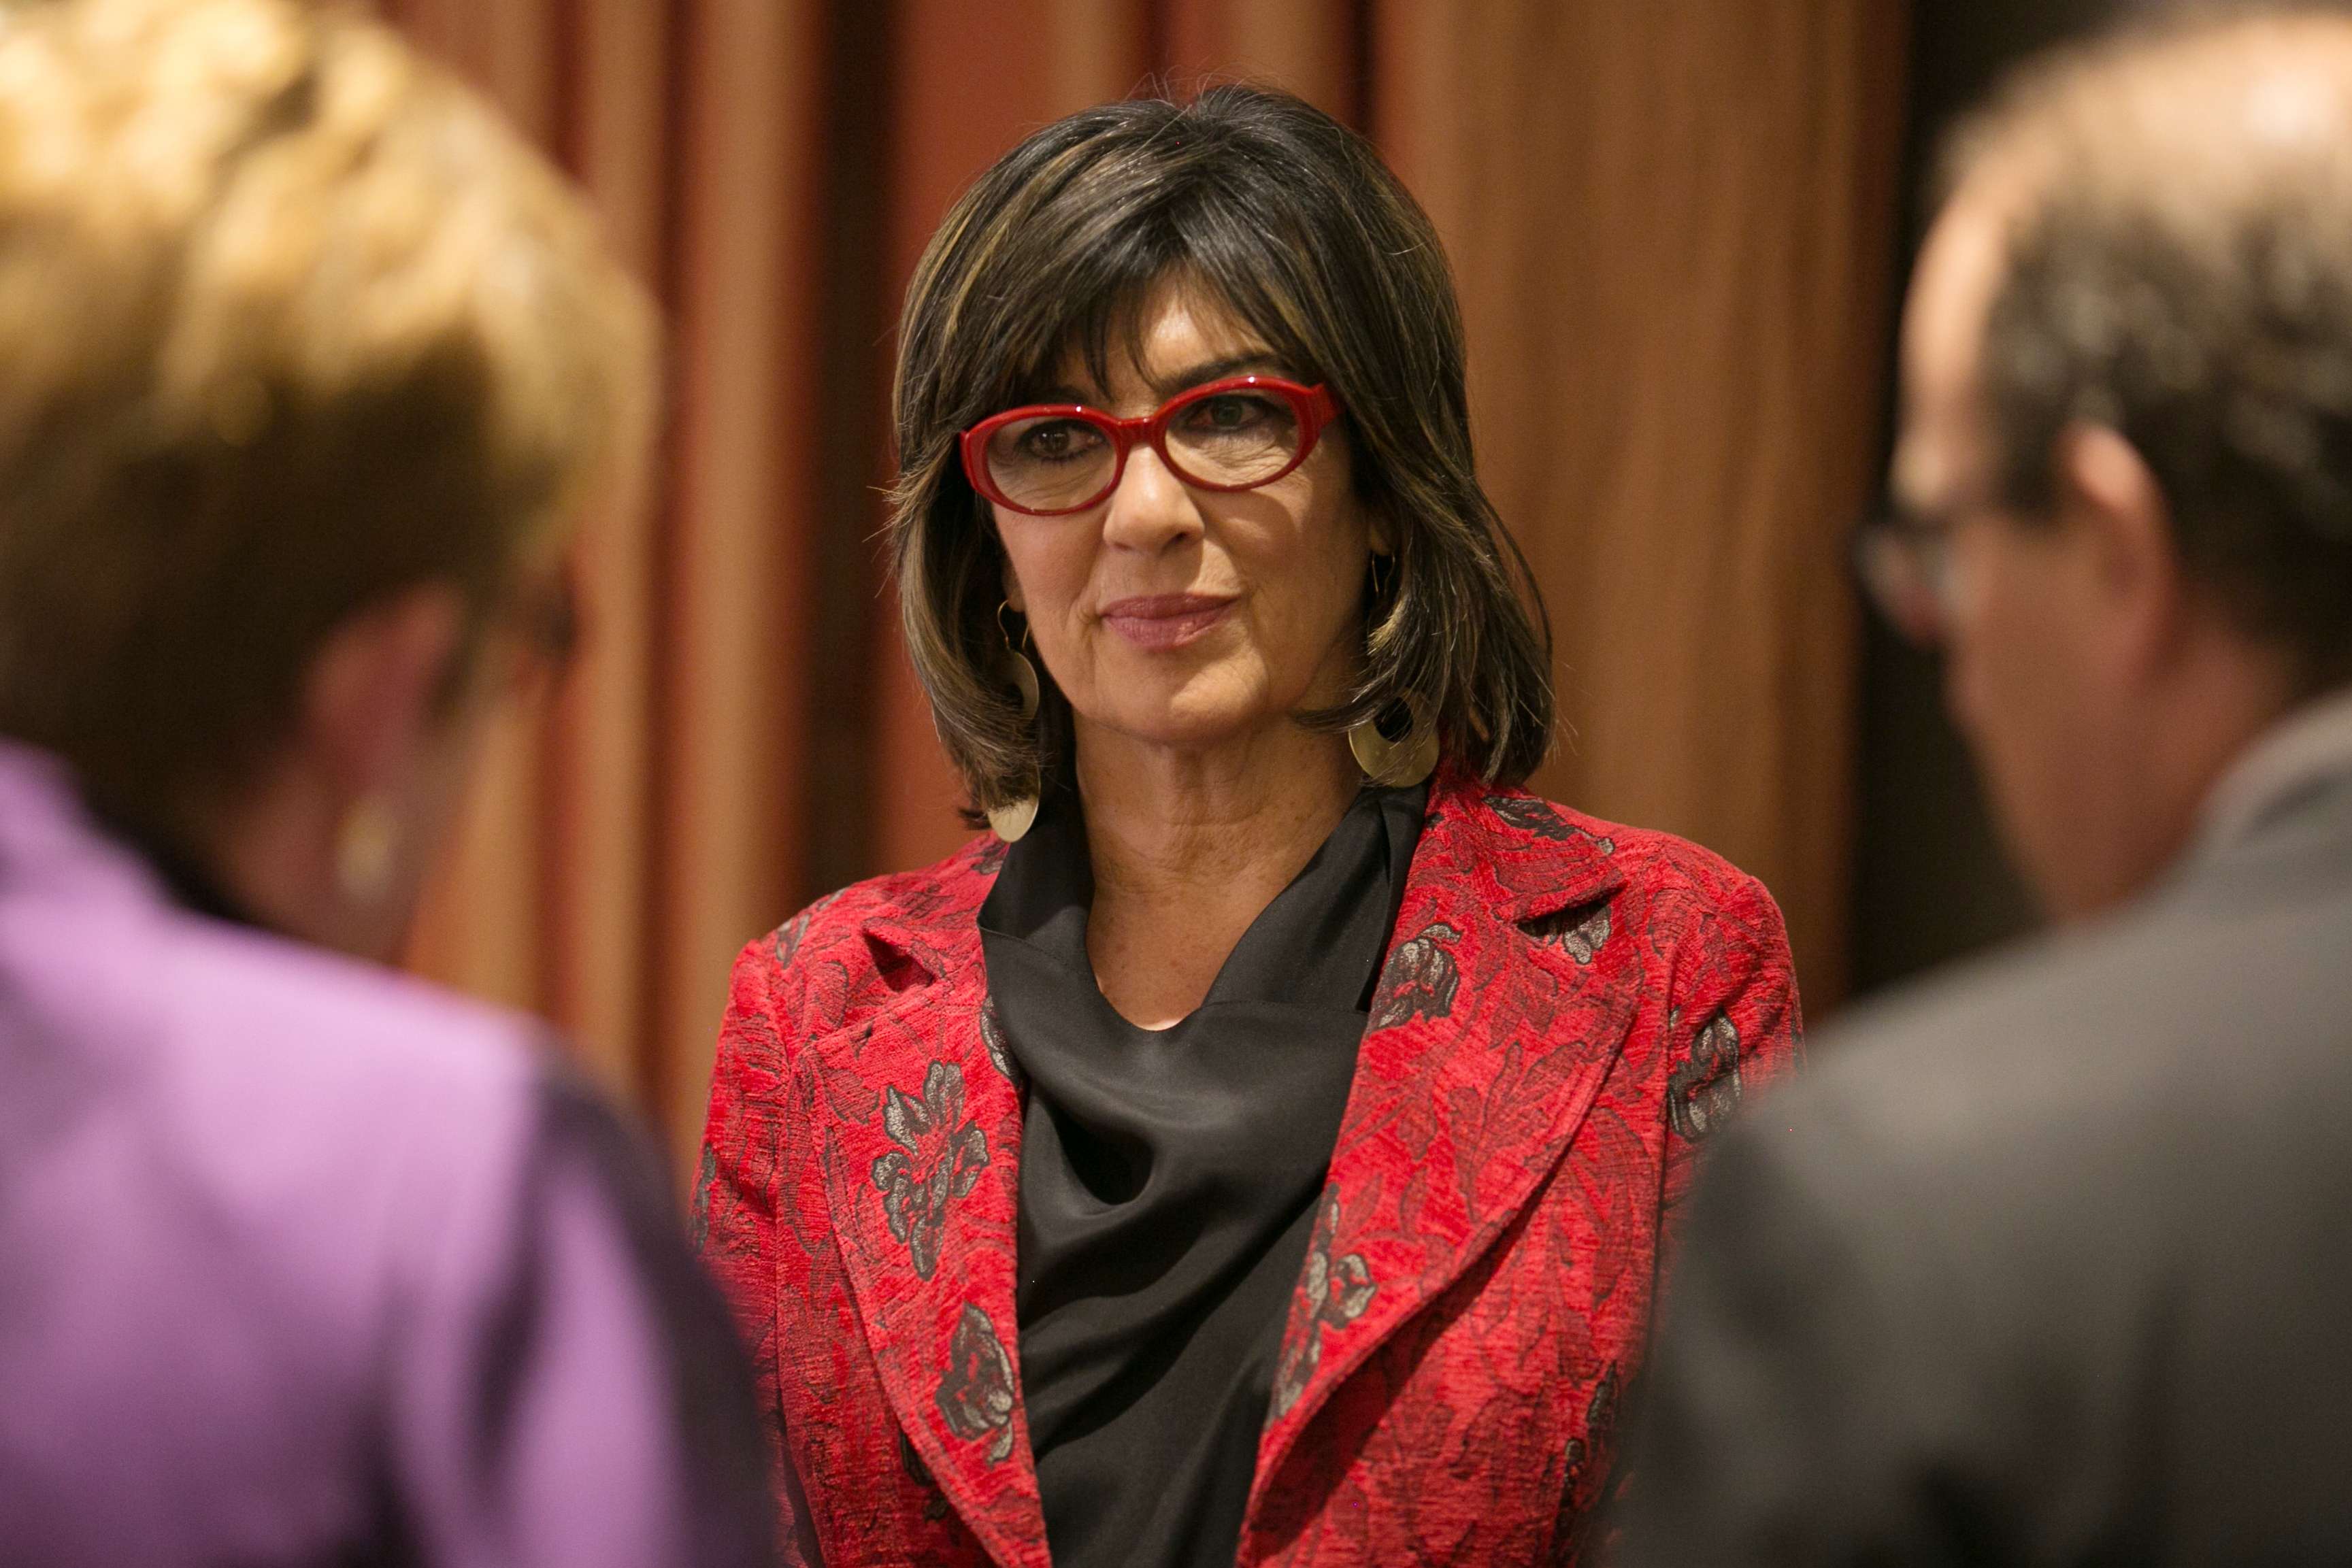 NEW YORK, NY - NOVEMBER 15: Christiane Amanpour speaks with attendees at CPJ's annual International Press Freedom Awards on November 15, 2017 in New York City. (Kevin Hagen—Getty Images)